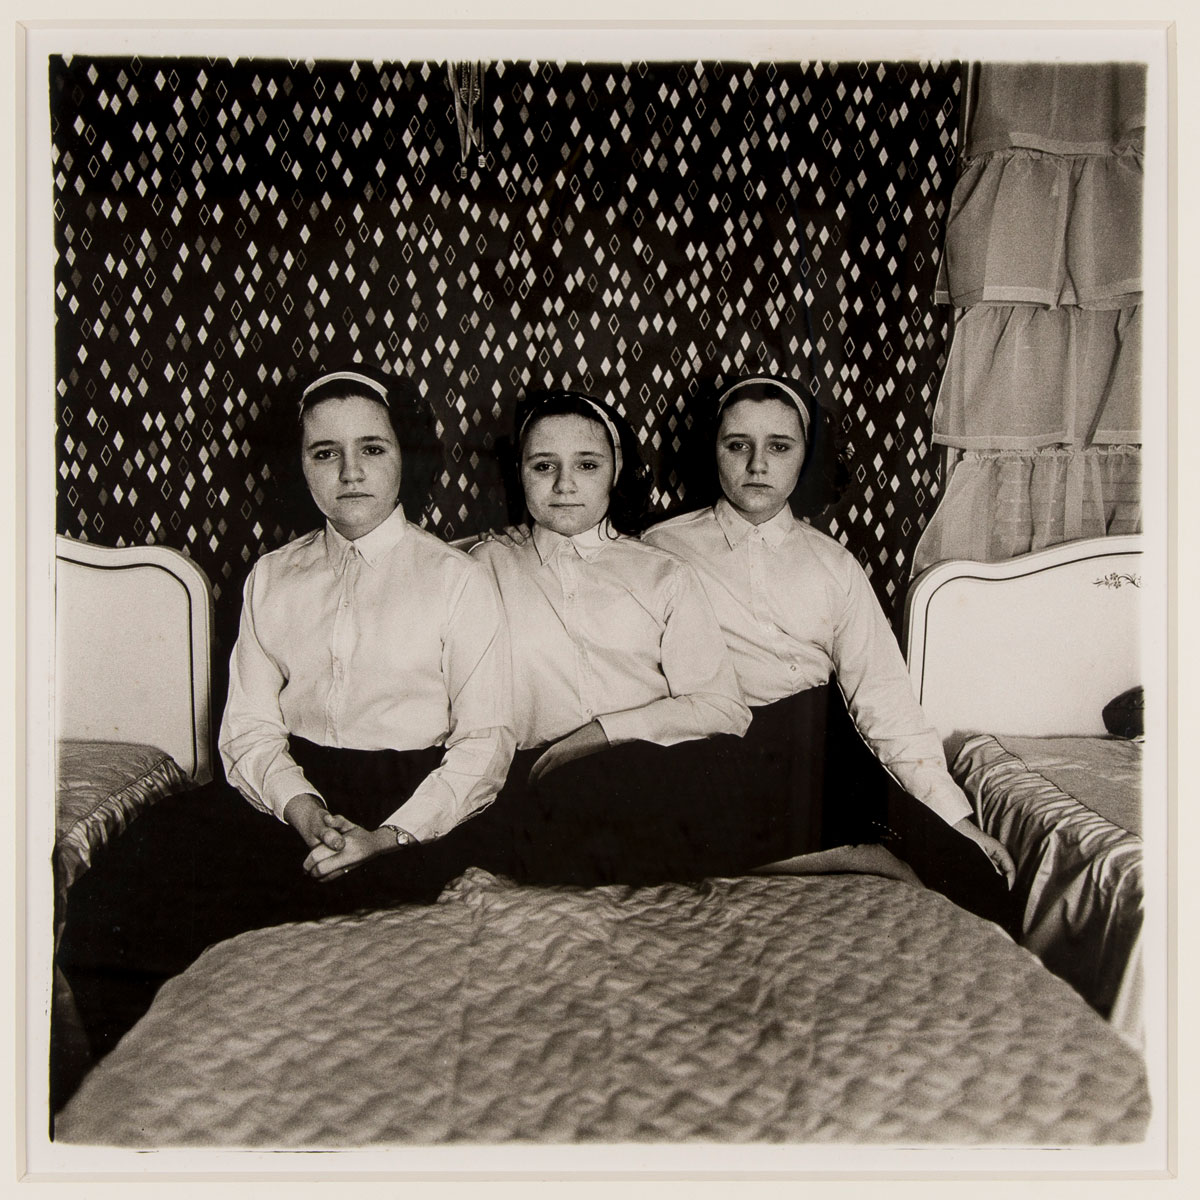 Three girls sit on a bed in a silver gelatin print.